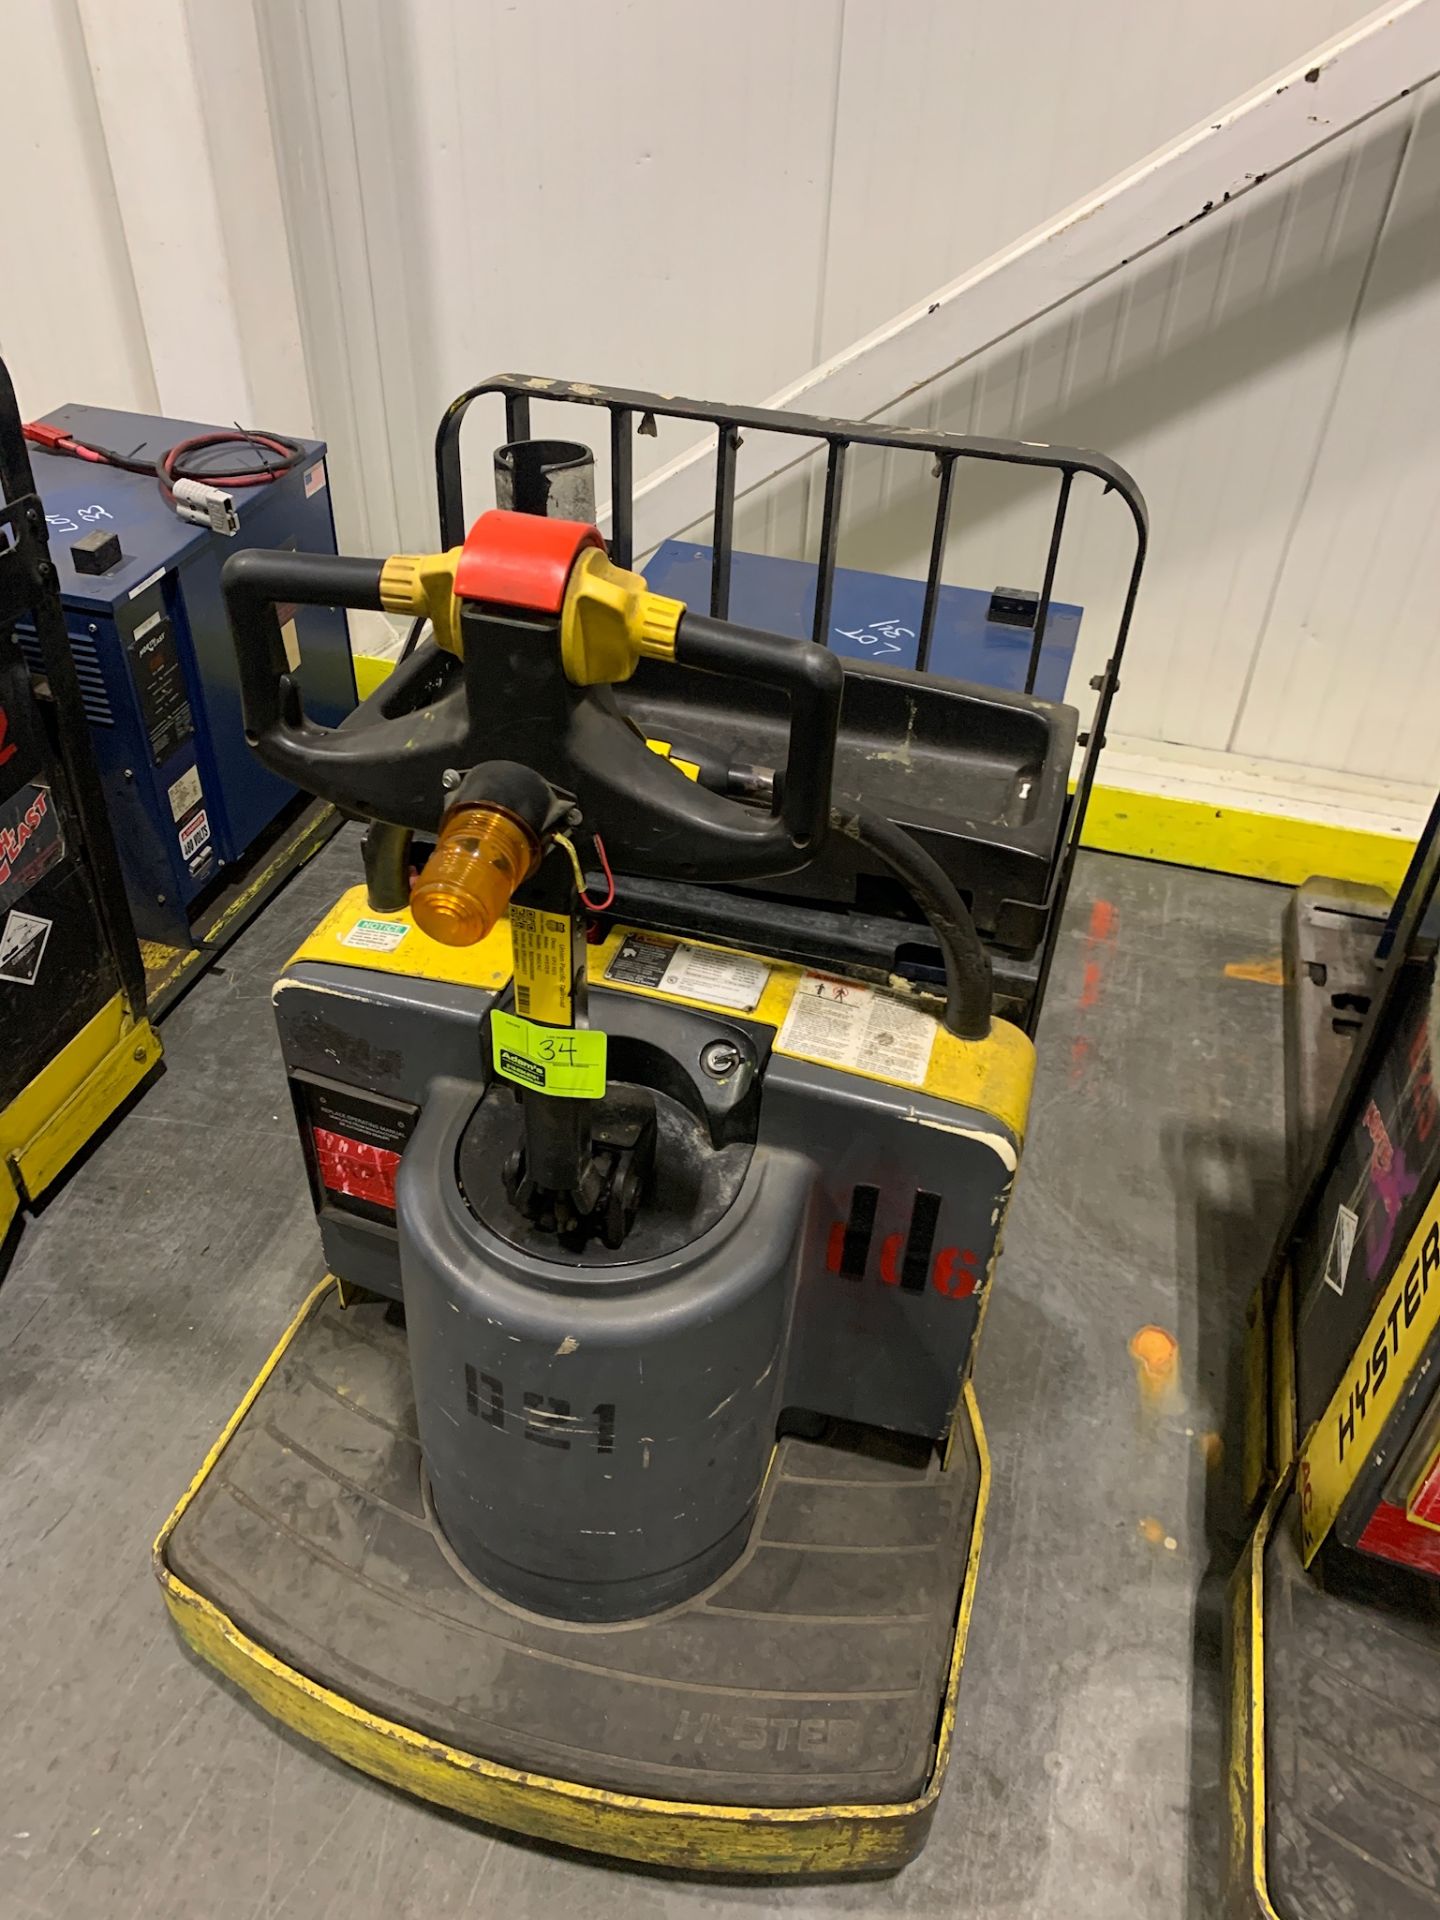 Hyster pallet jack with batter and charger; 8032 HOURS